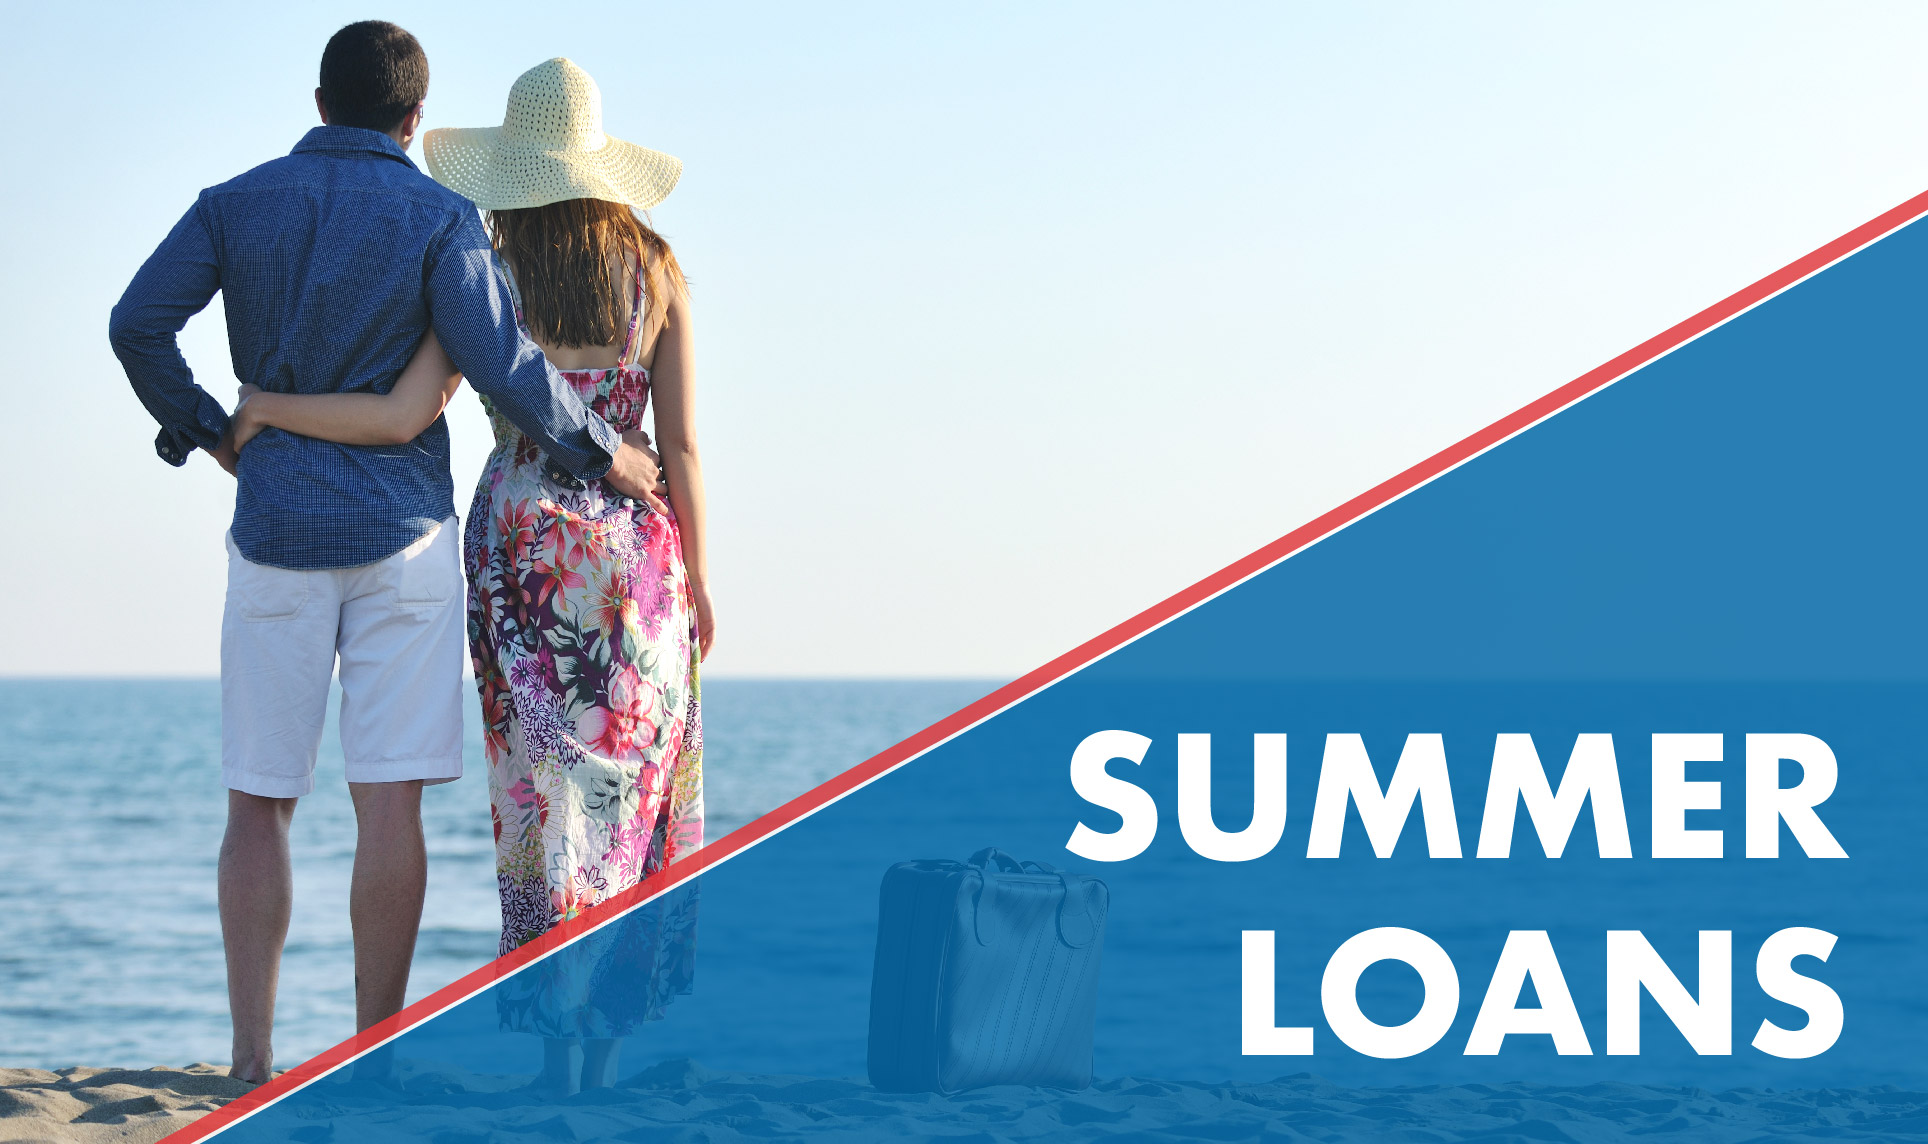 Apply For A Summer Loan Today!